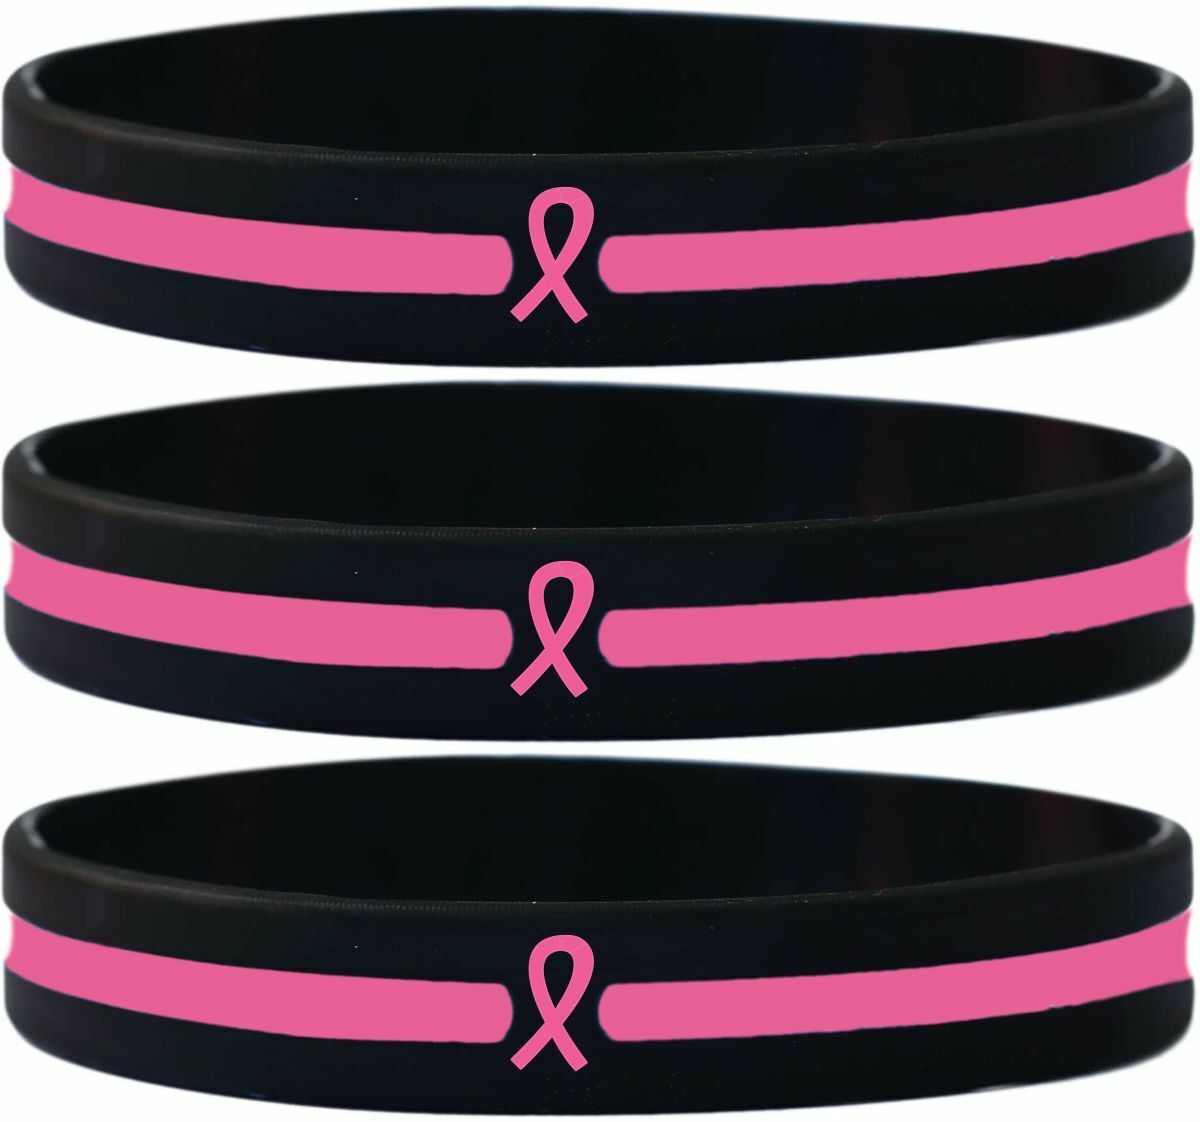 Pink Ribbon Wristbands with The Thin PINK Line - Wholesale Lot o